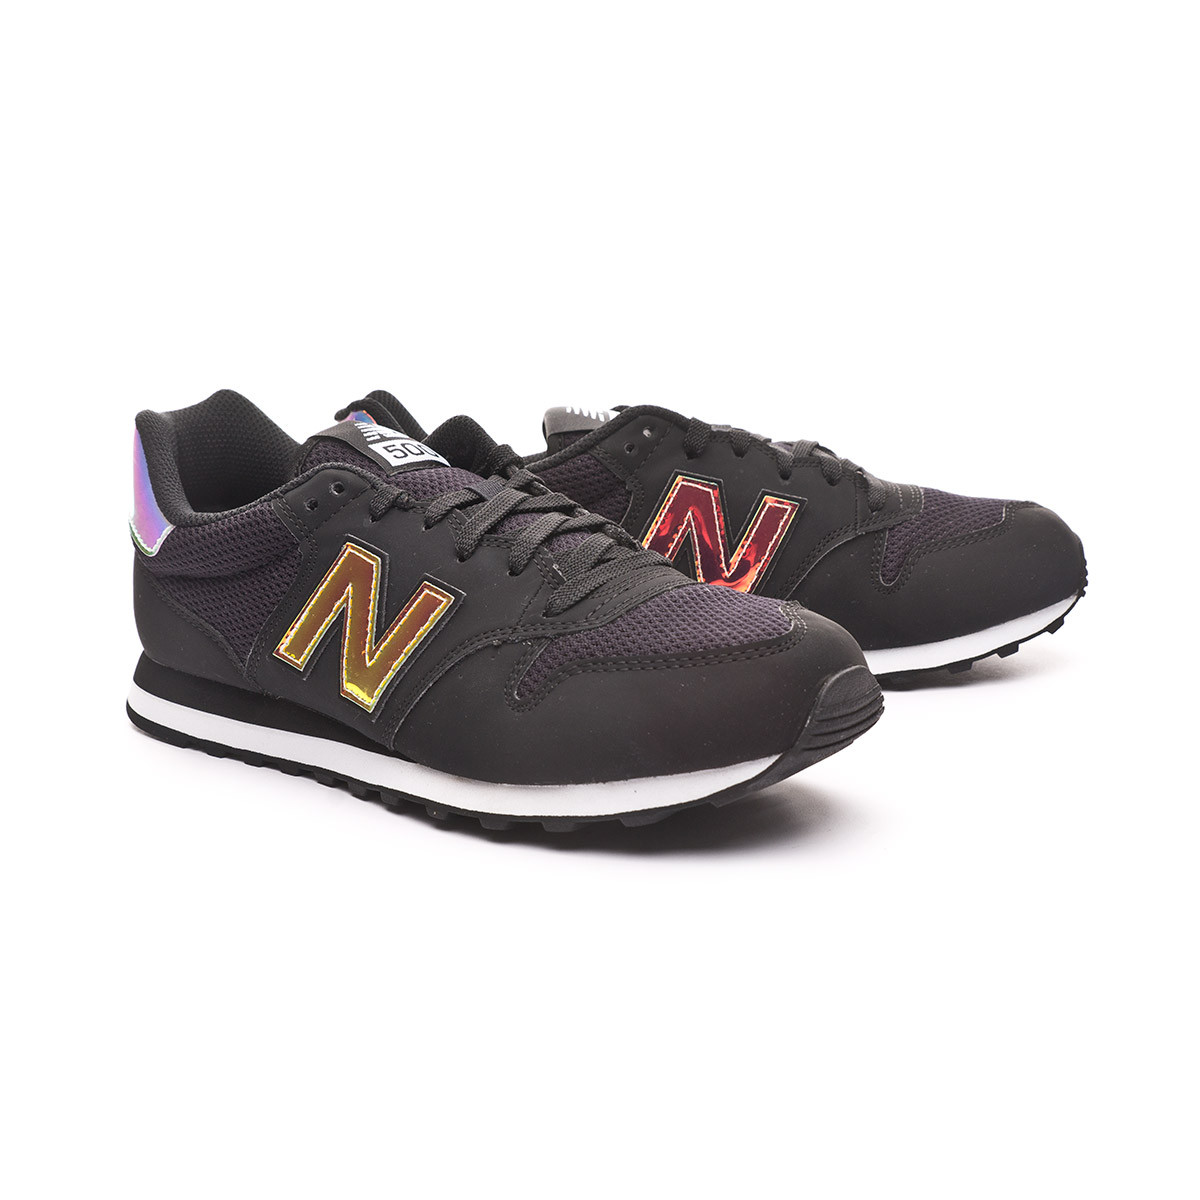 new balance 500 classic sold, OFF 73%,Buy!